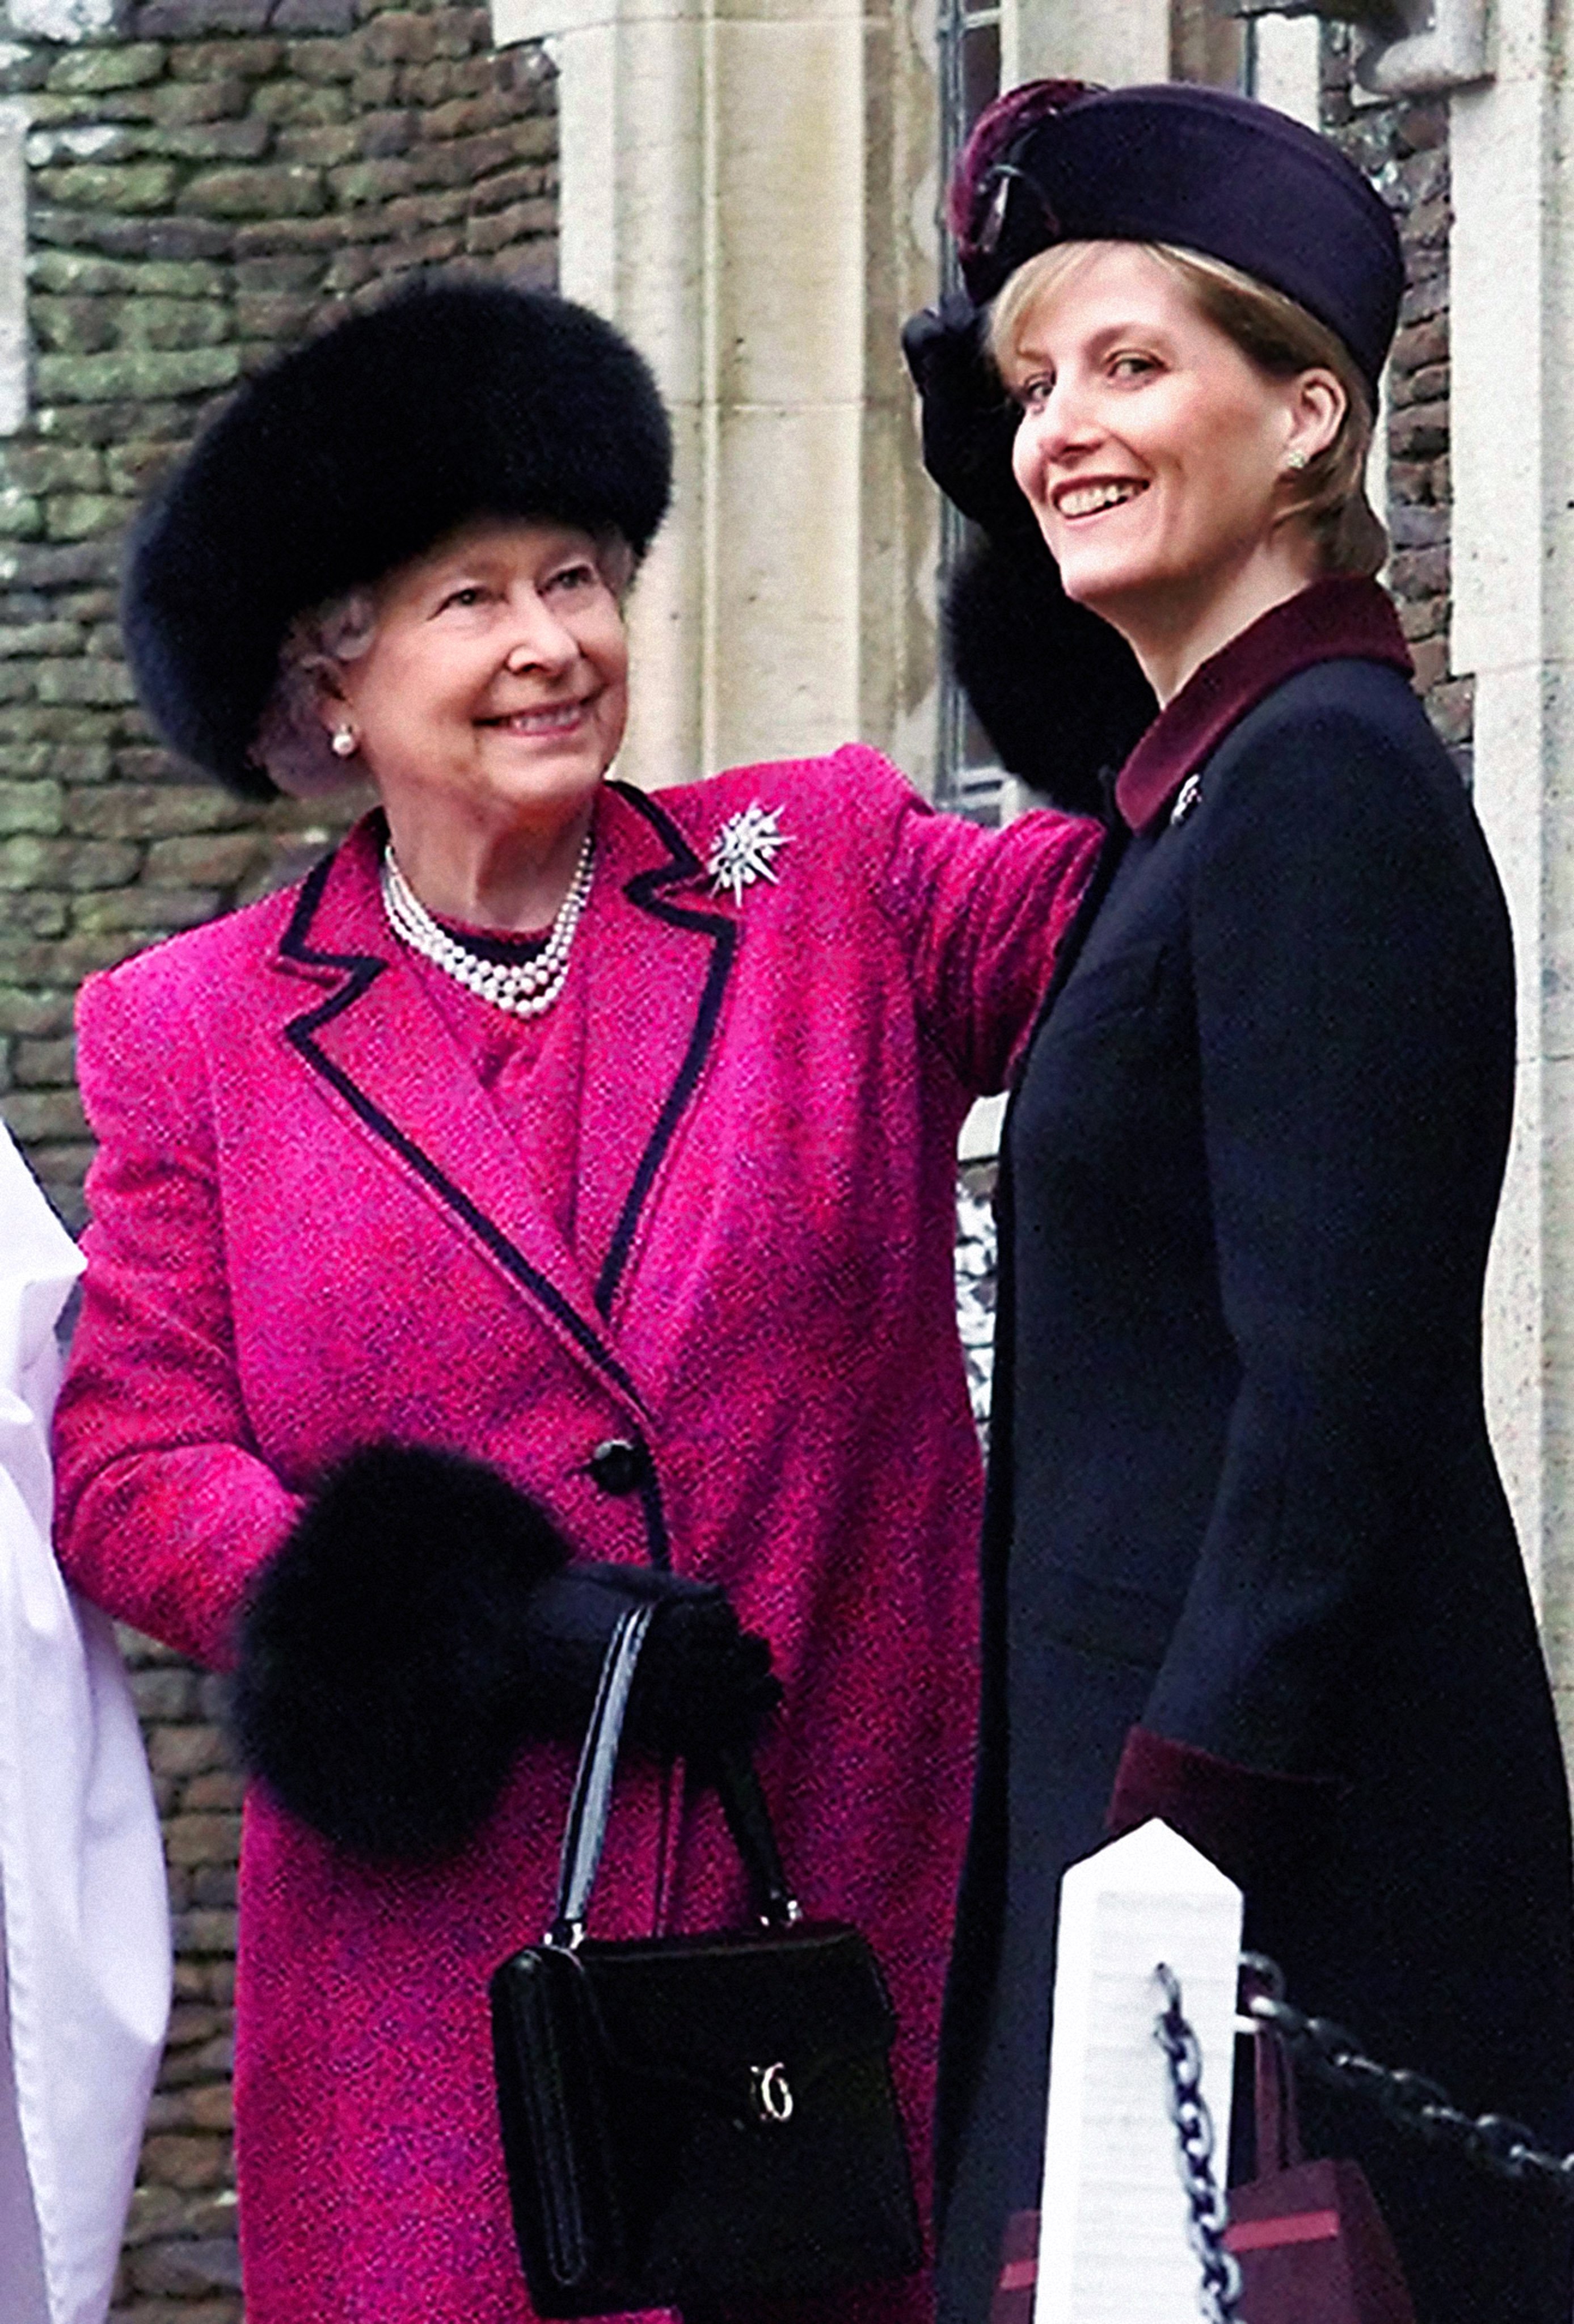 Queen Elizabeth II straightens Sophie, The Countess of Wessex's hat, while they wait to attend the Christmas Day service at the Sandringham Church, December 25, 2002  | Source: Getty Images